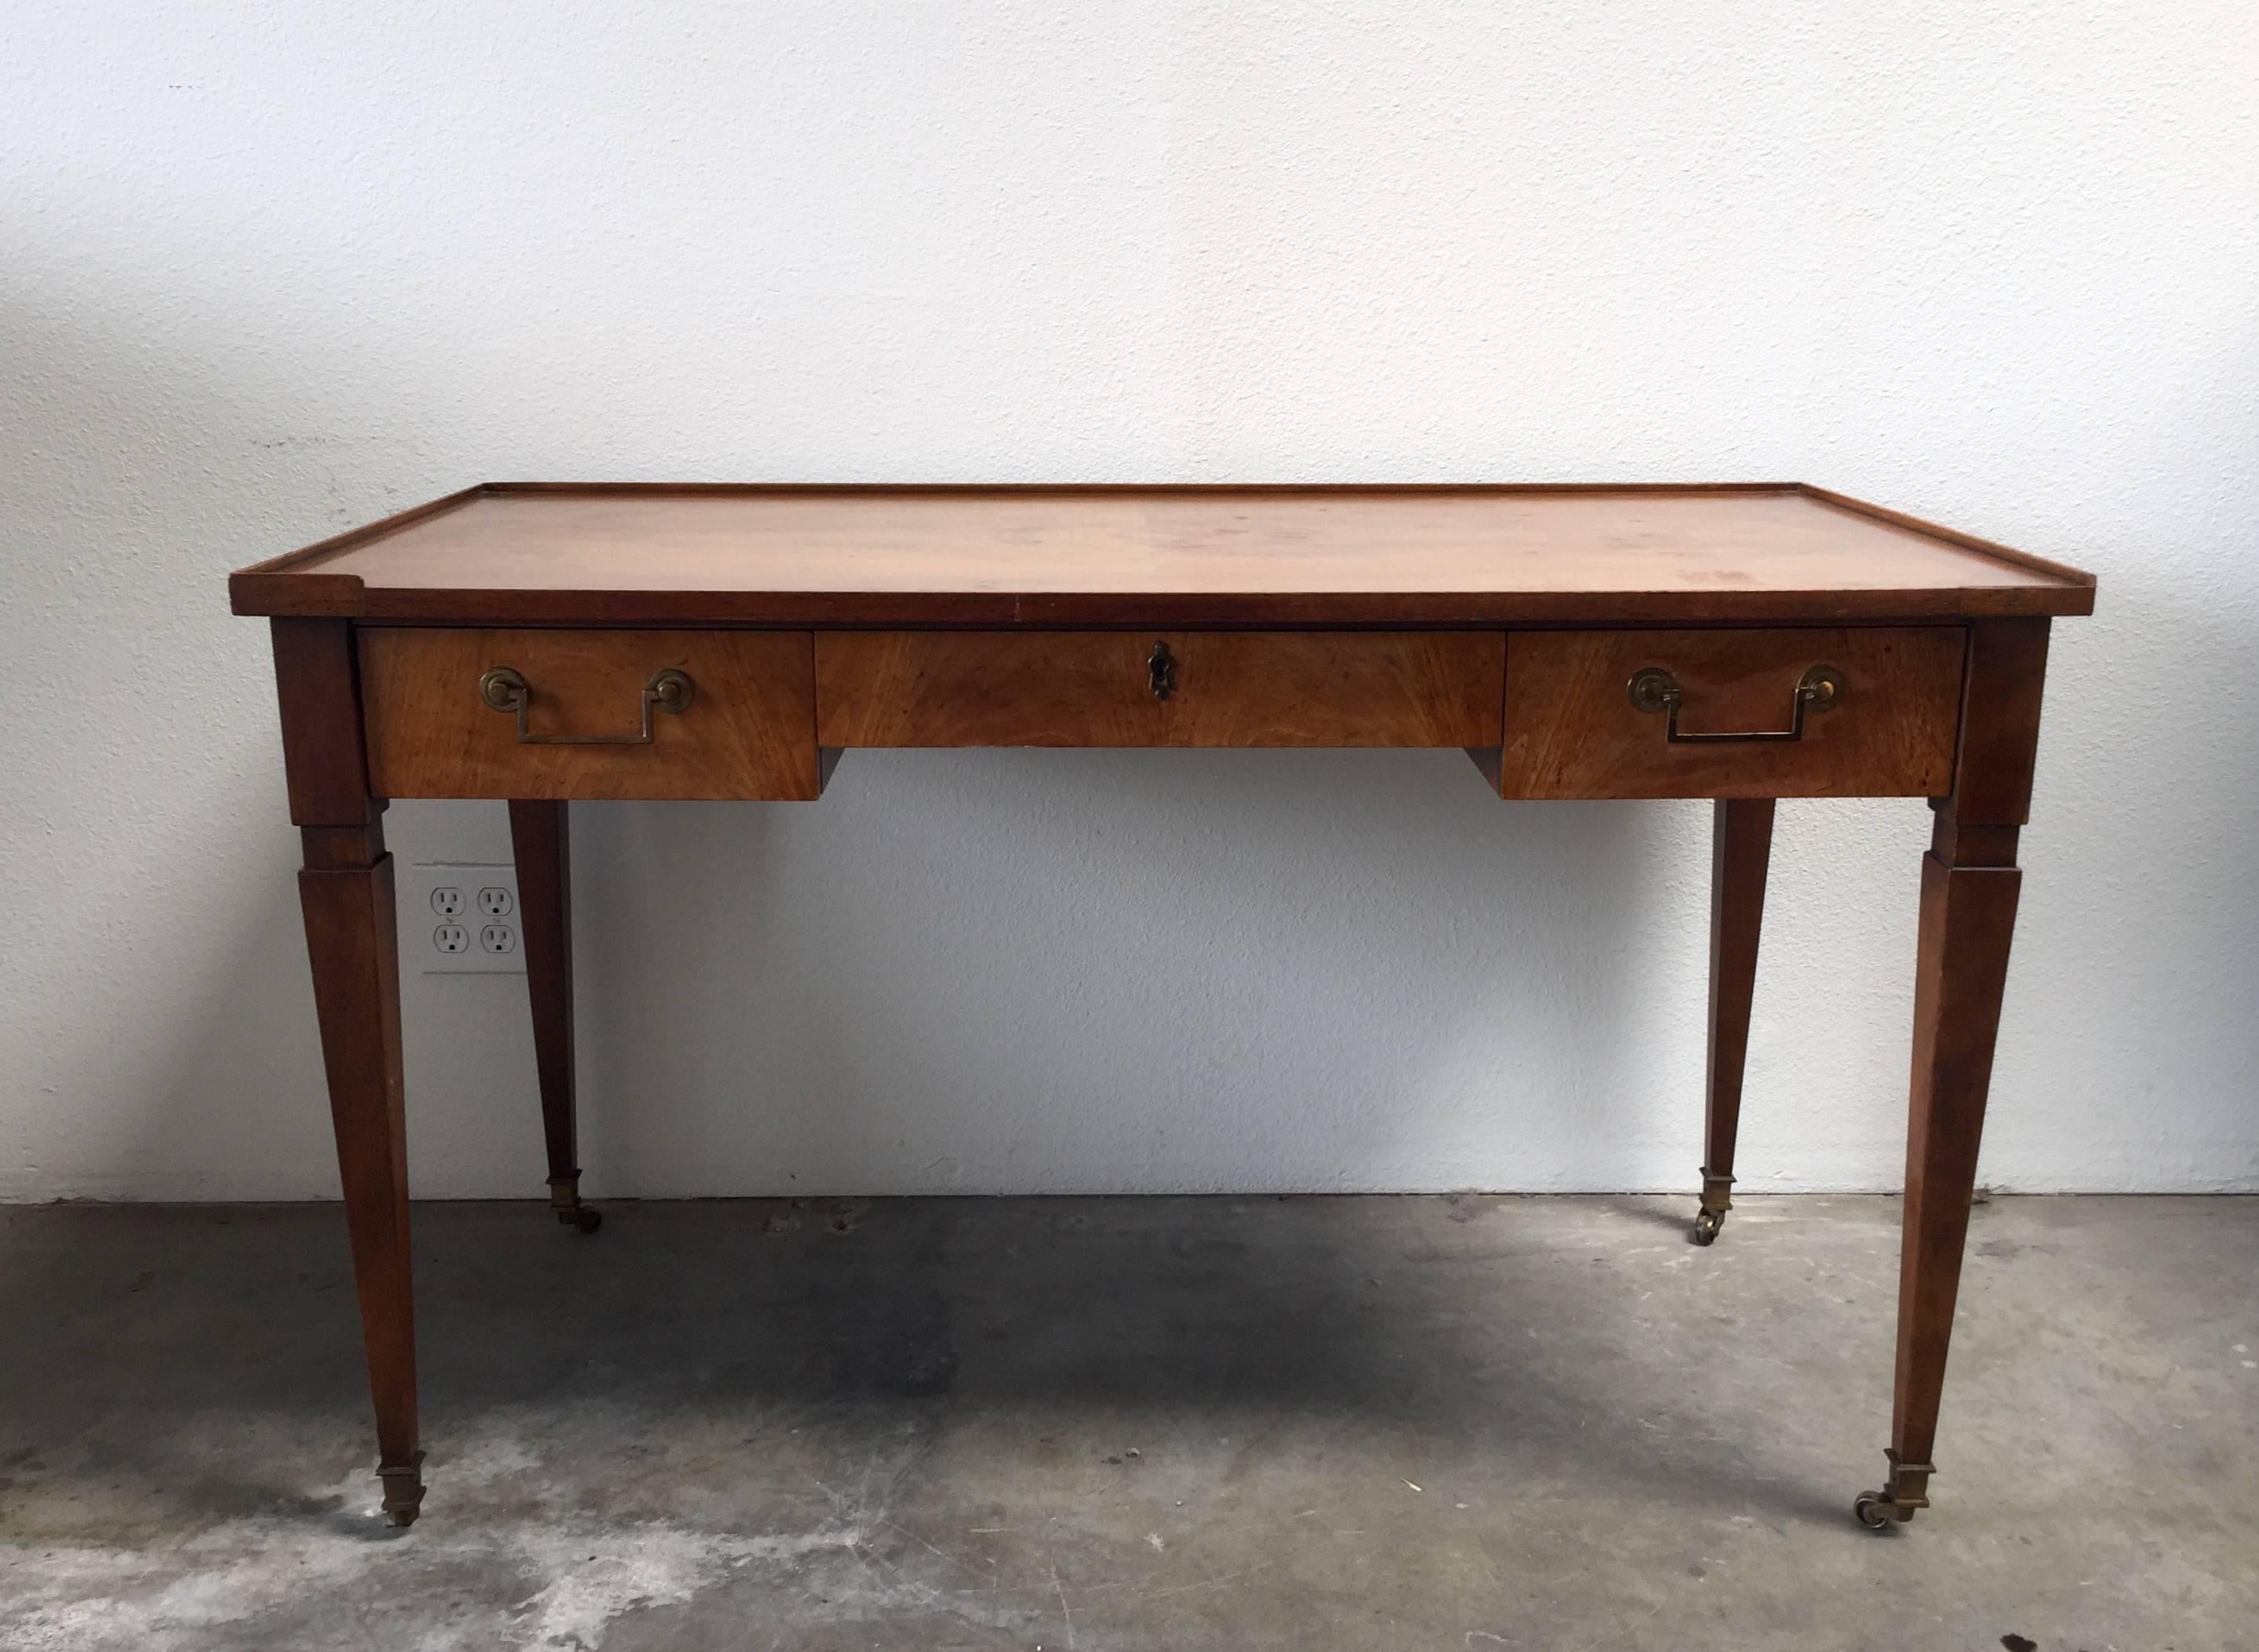 Elegant writing desk by Baker. Boasts three top drawers with brass hardware, stylist legs and brass wheels. Finished back allows this statement piece to float in any space. Makers mark in top right drawer.